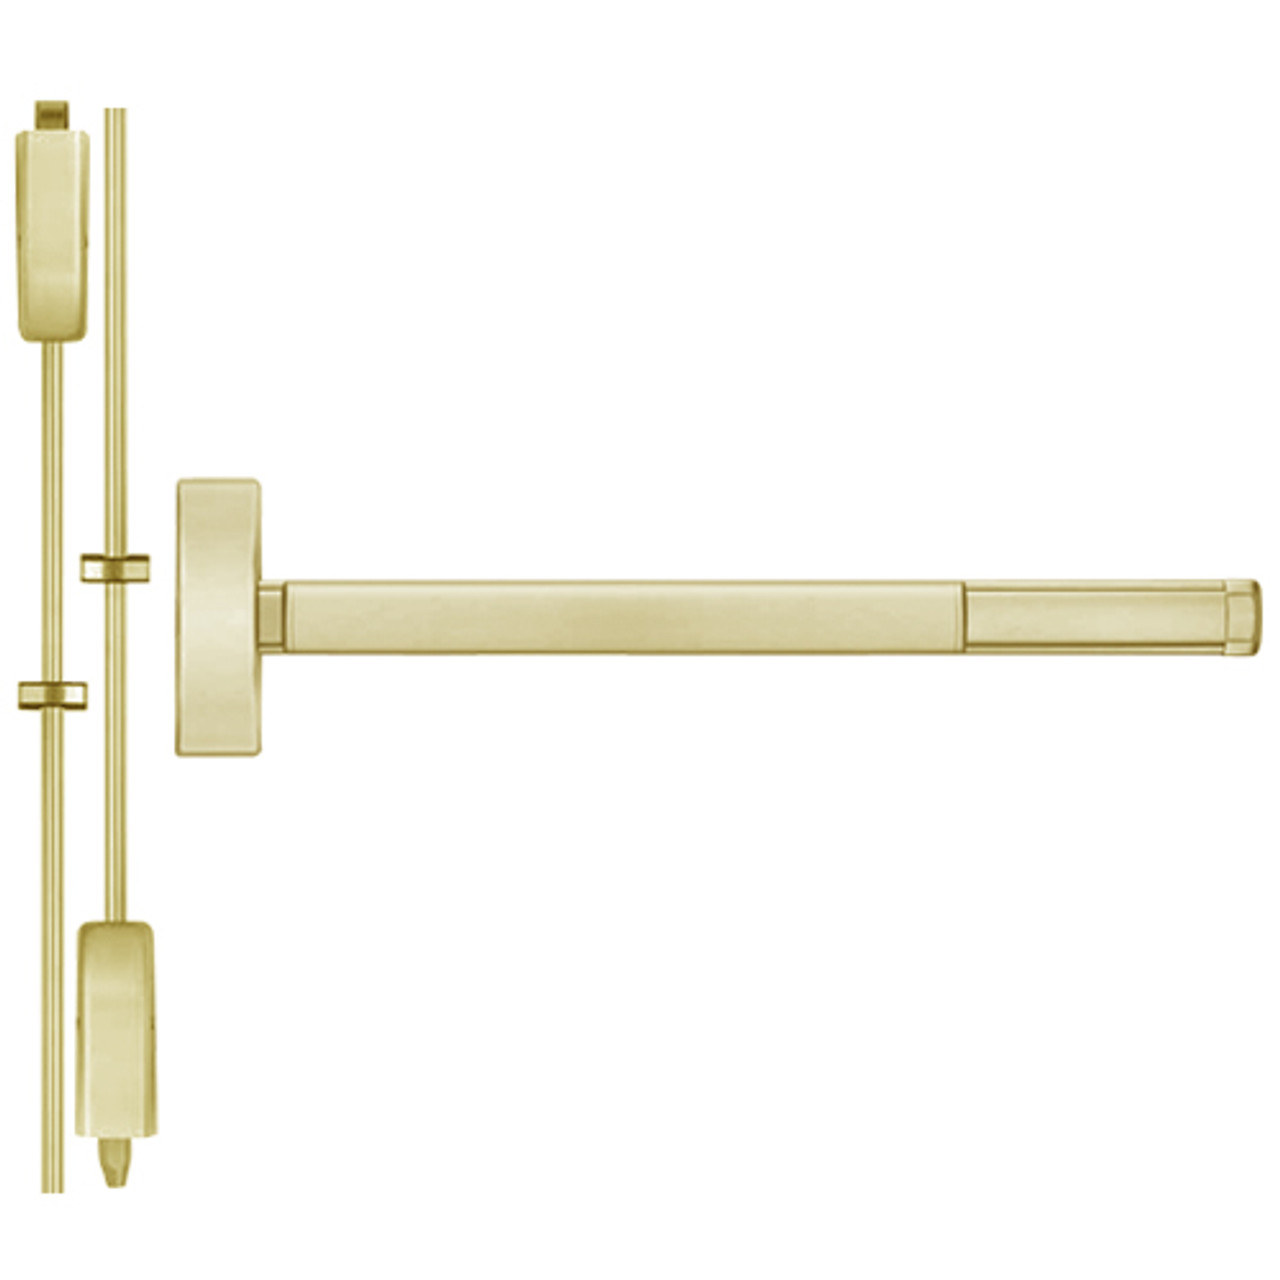 DEFL2201-606-36 PHI 2200 Series Fire Rated Apex Surface Vertical Rod Device with Delayed Egress Prepped for Cover Plate in Satin Brass Finish